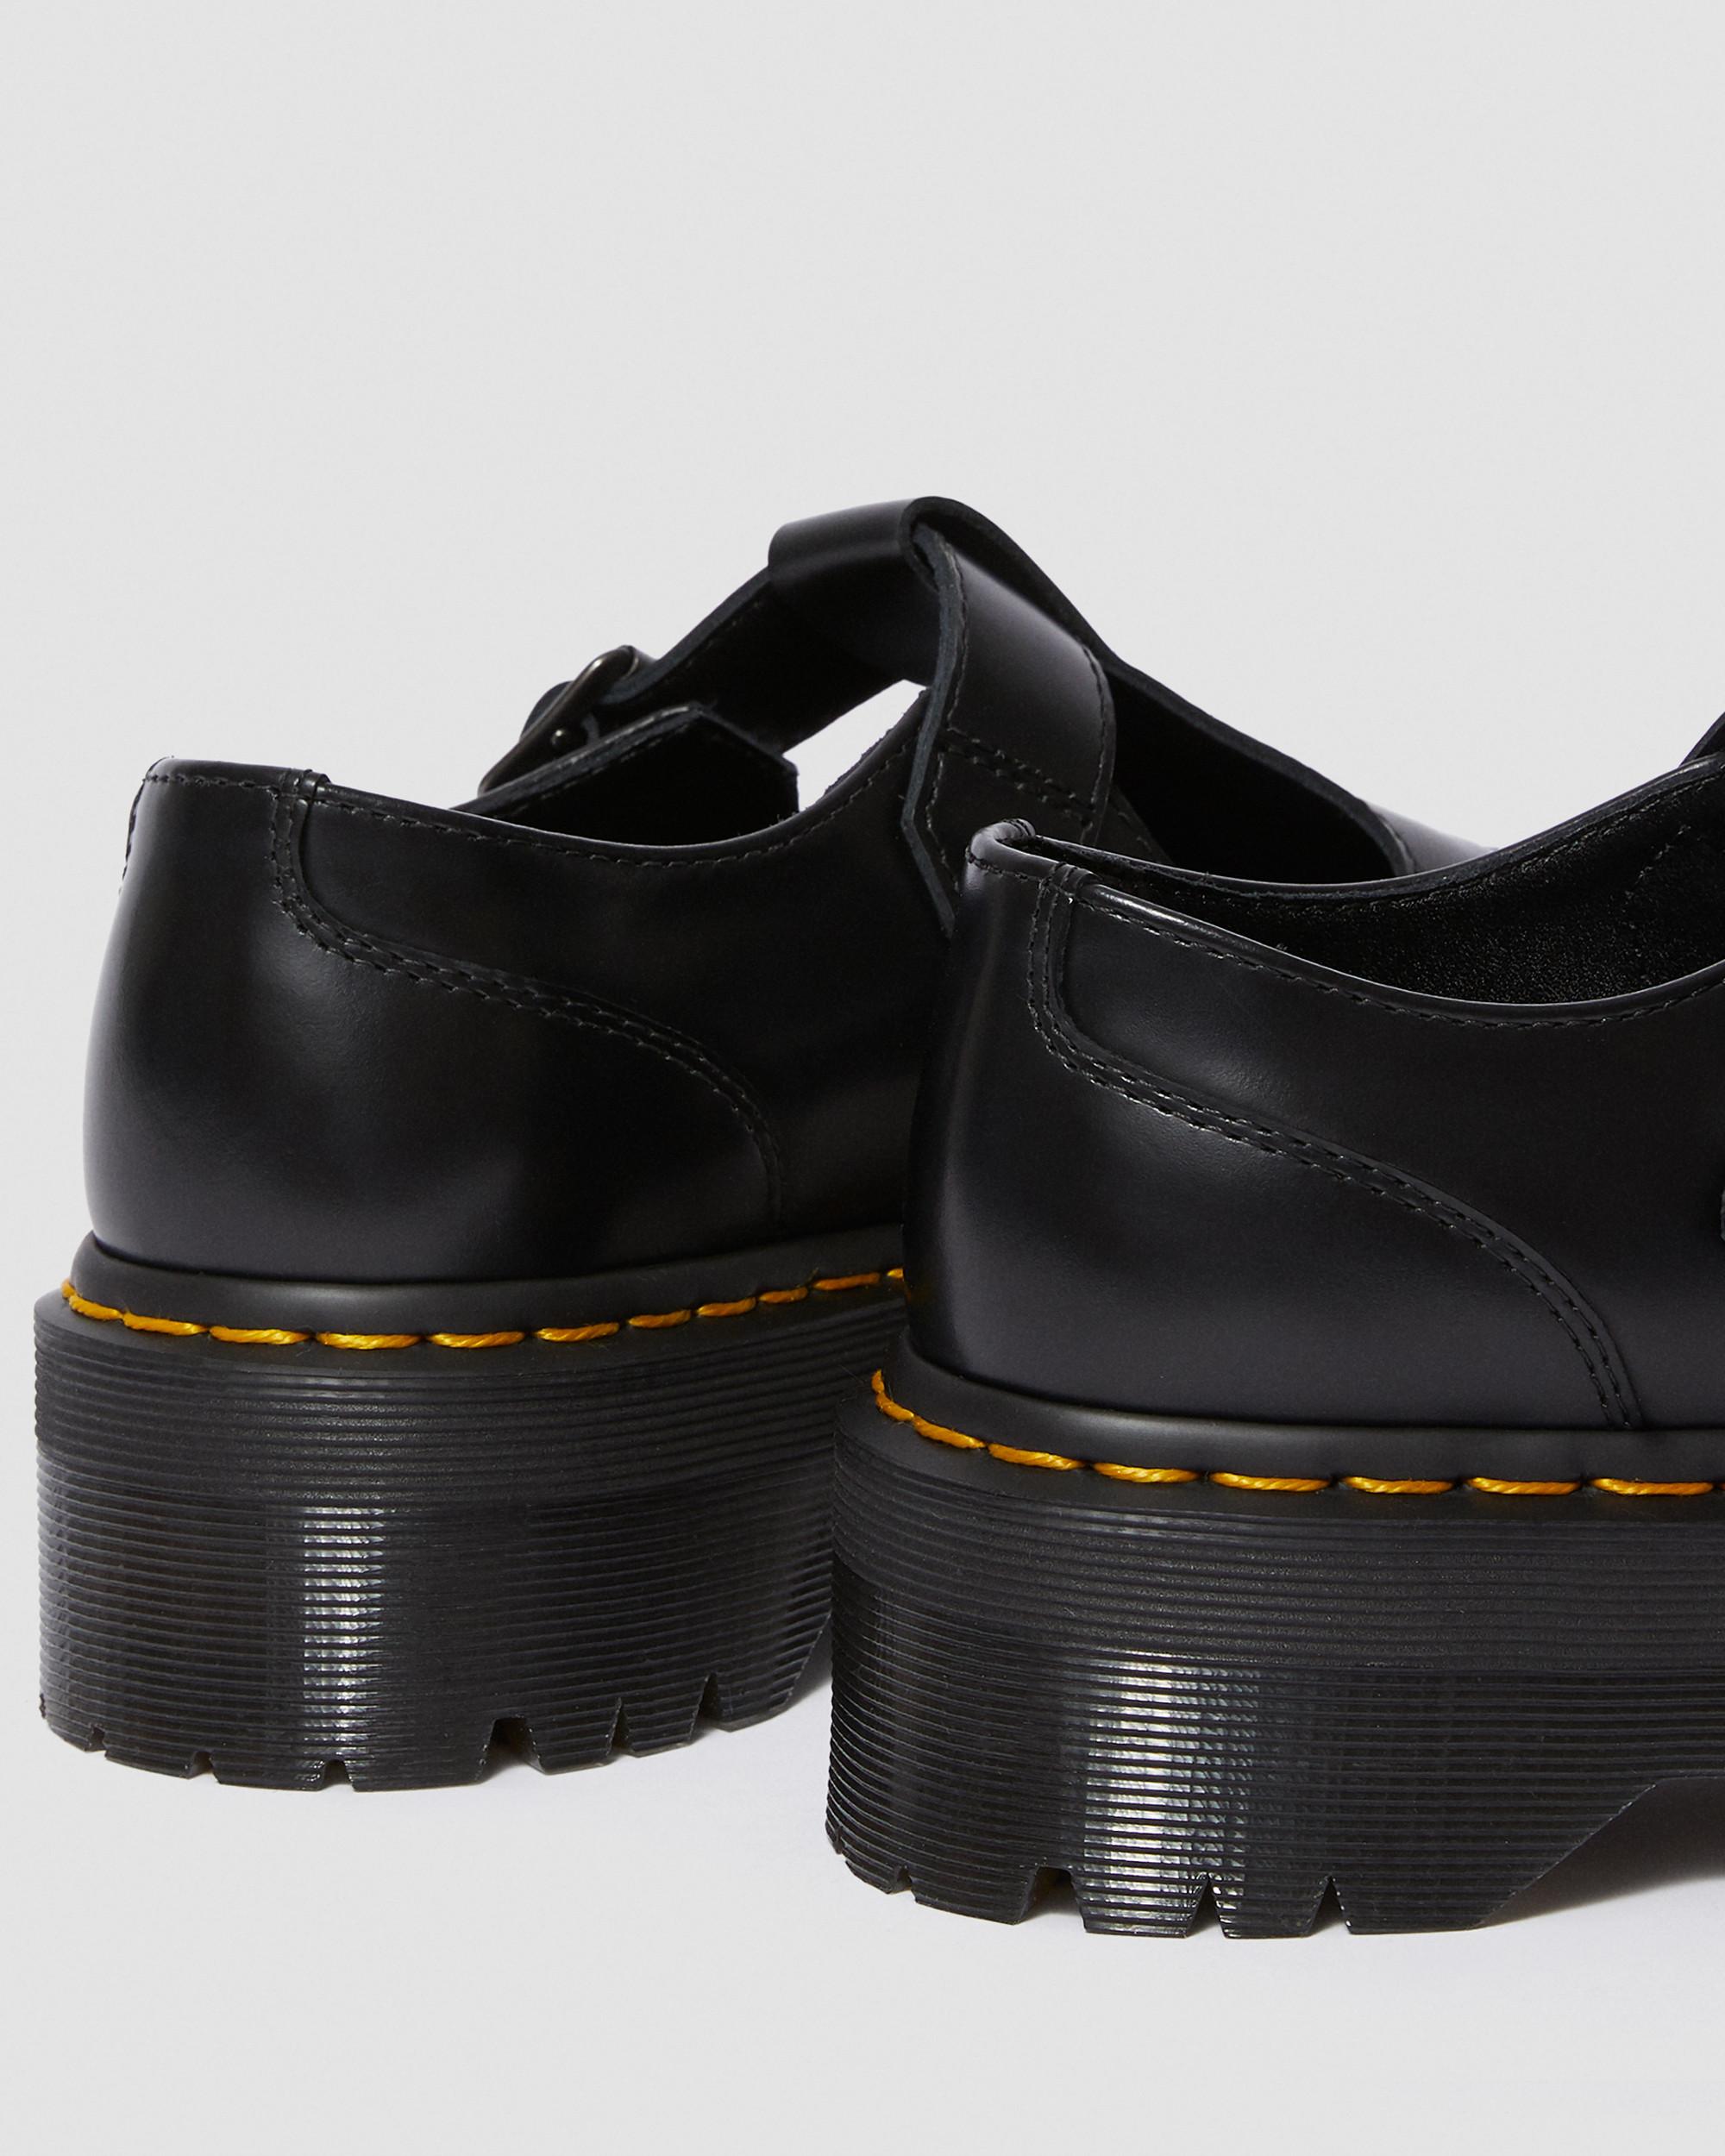 Bethan Smooth Leather Platform Mary Jane ShoesBethan Smooth Leather Platform Mary Jane Shoes Dr. Martens